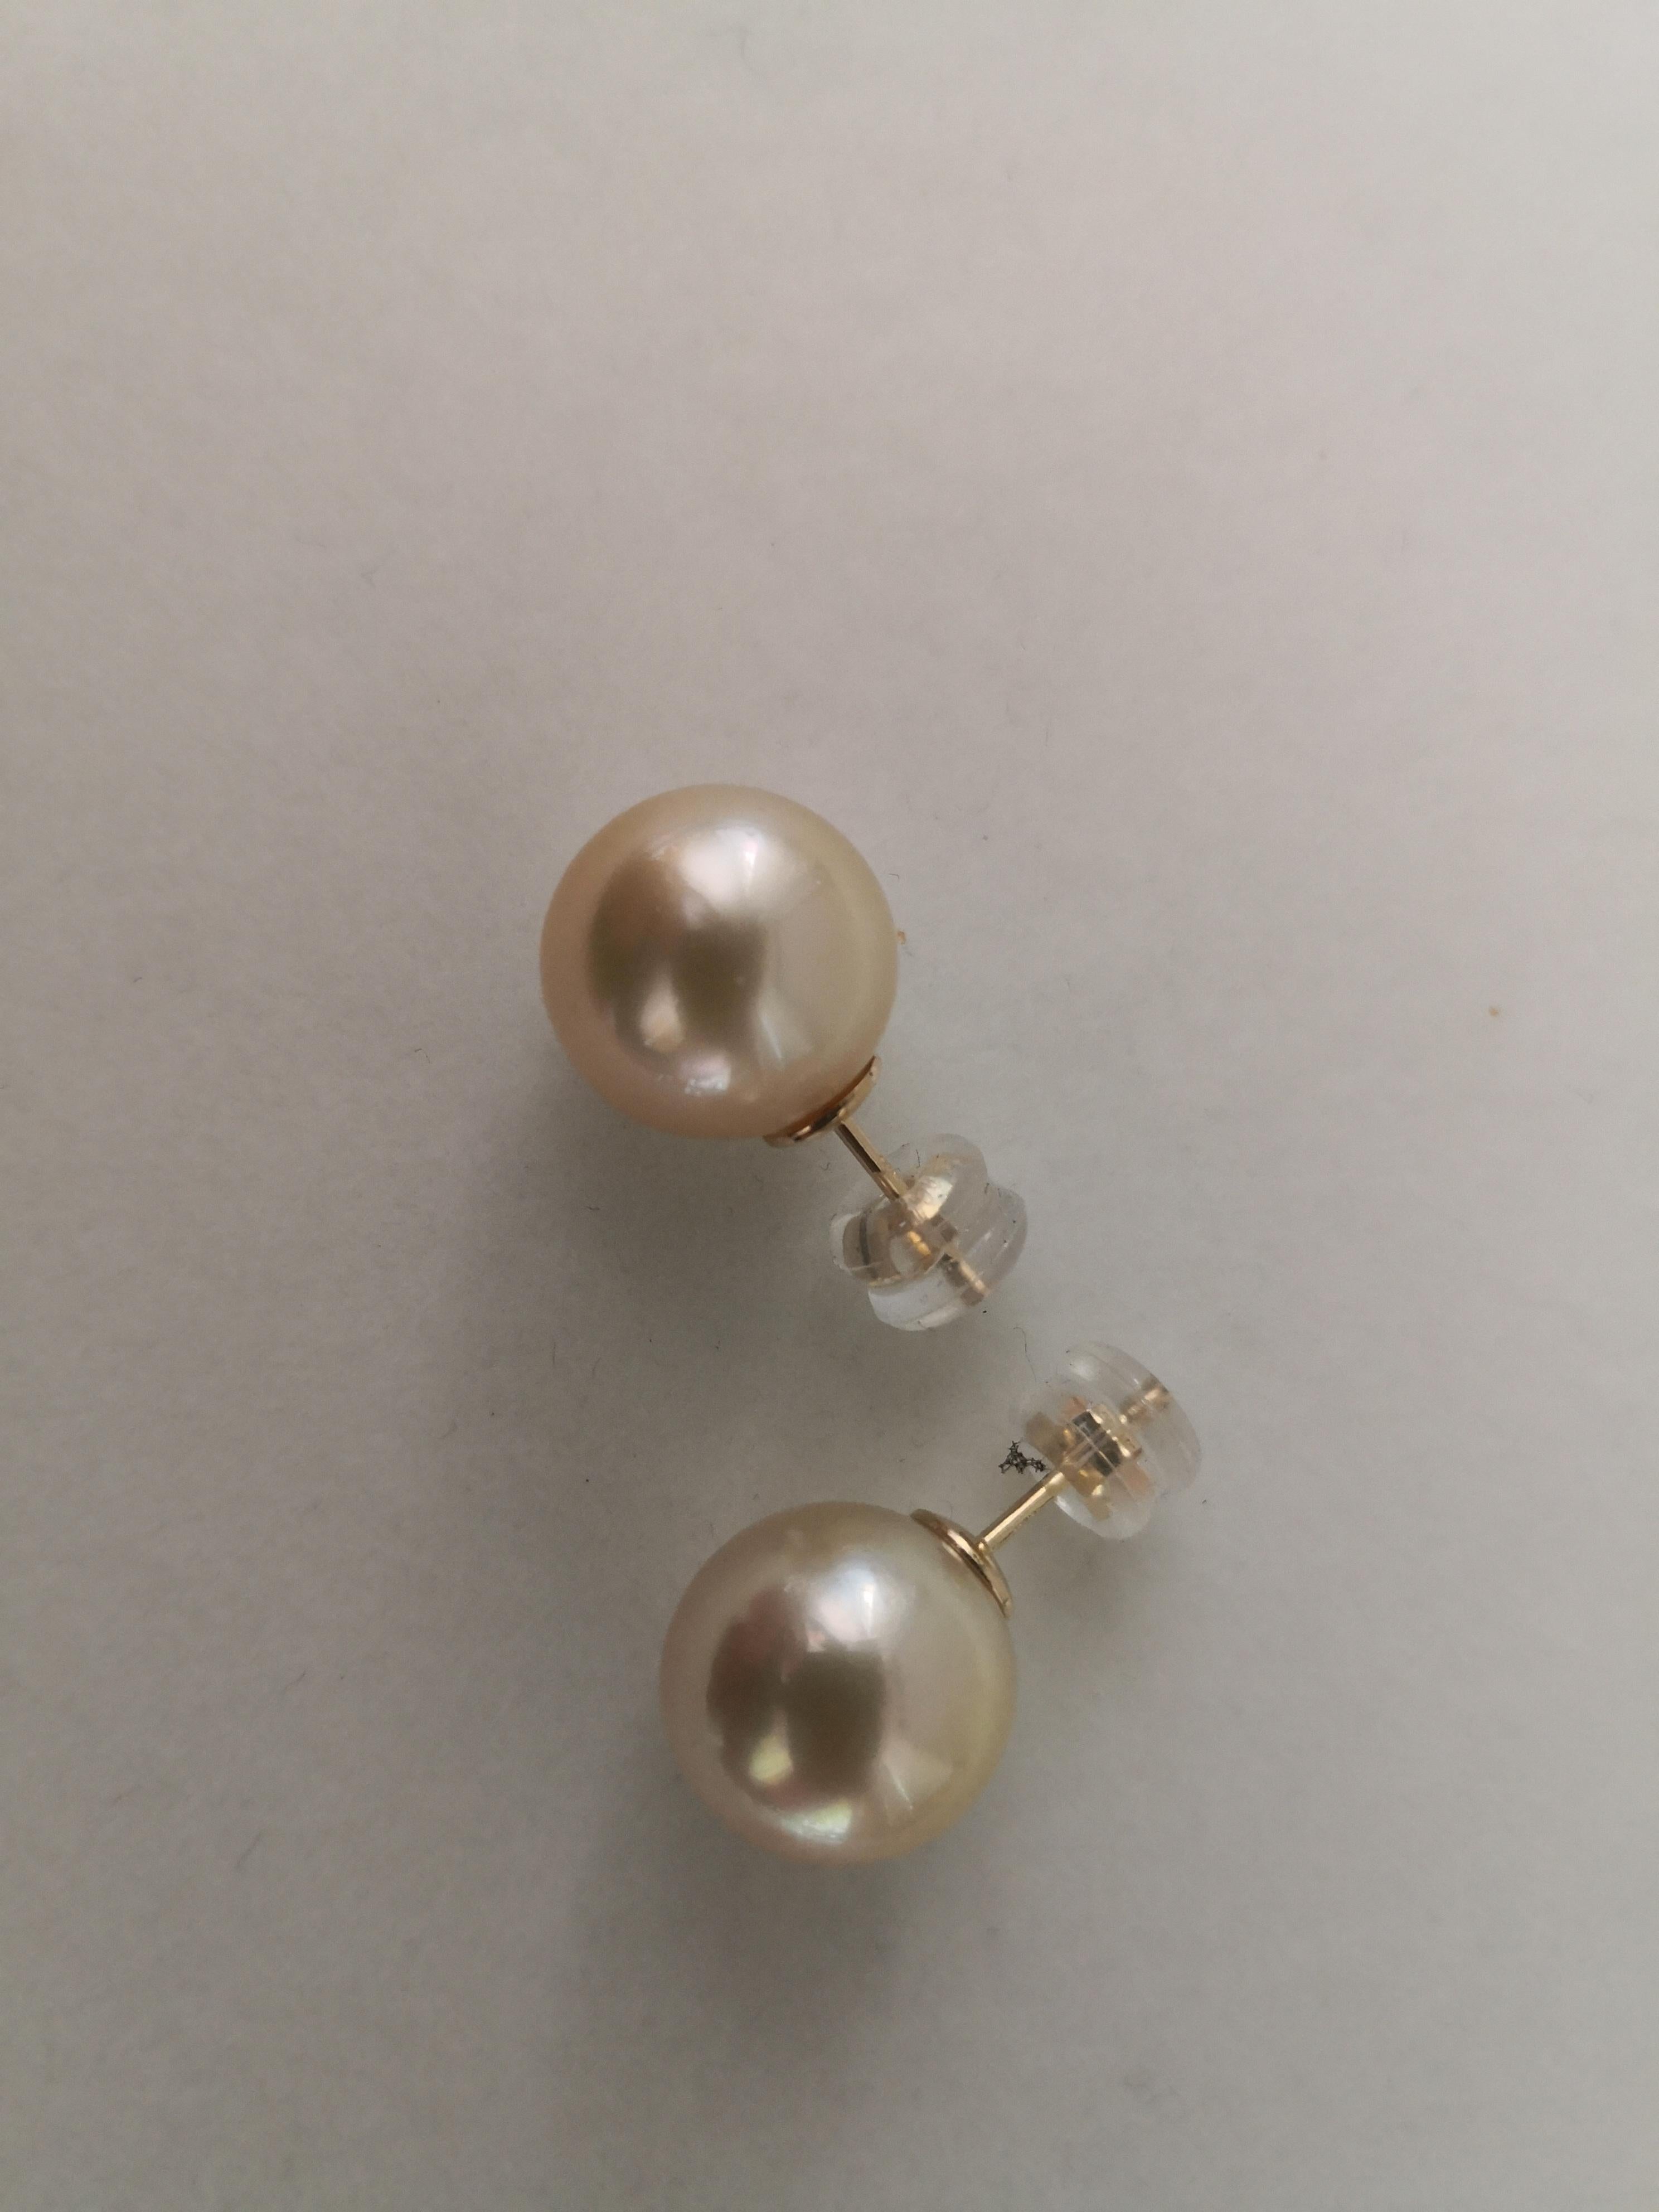 - Natural  Color South Sea Pearls earrings

- Origin: Indonesia ocean waters

- Produced by Pinctada Maxima Oyster

- 18K Yellow Gold mounting

- Size of Pearls 12 mm of diameter

- Pearls of round shape

- High natural luster and orient pearls

-